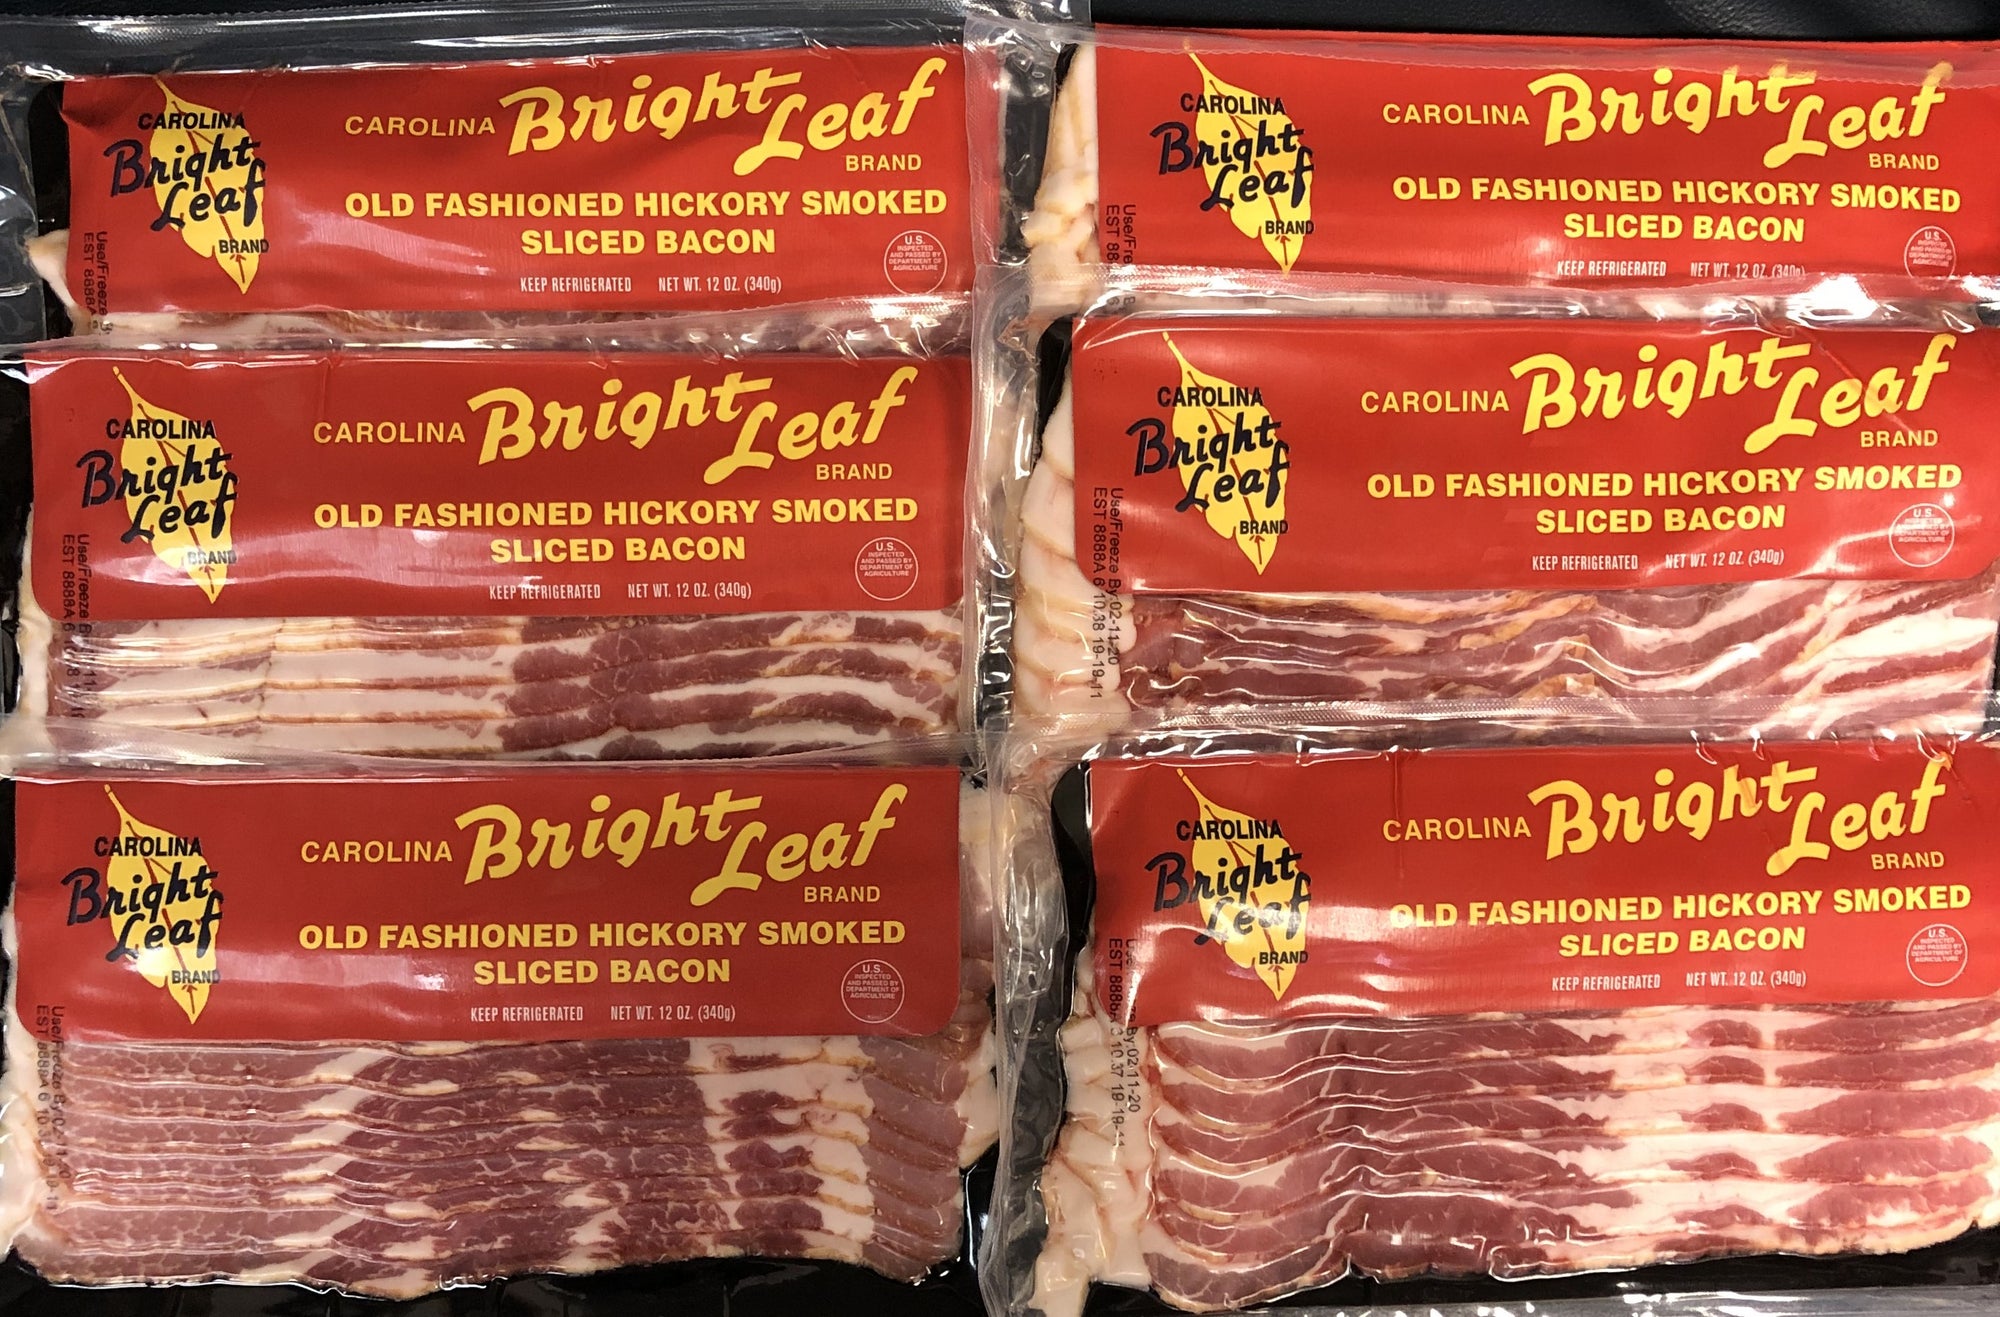 Bright Leaf Old Fashioned Hickory Smoked Bacon (6 packages)